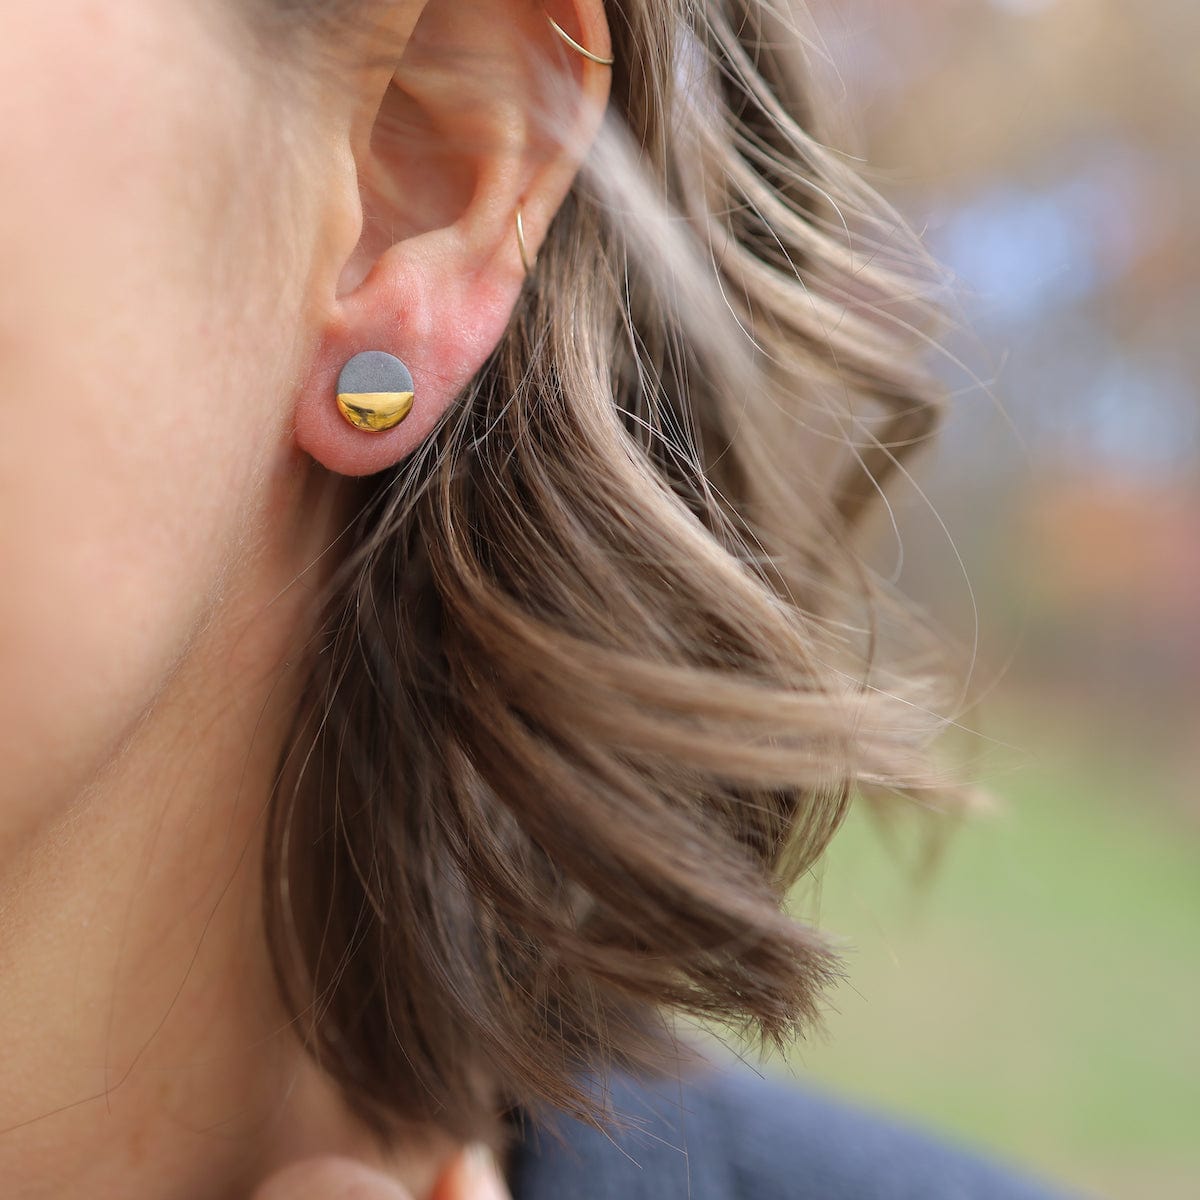 EAR-GF Large Grey Gold Dipped Studs